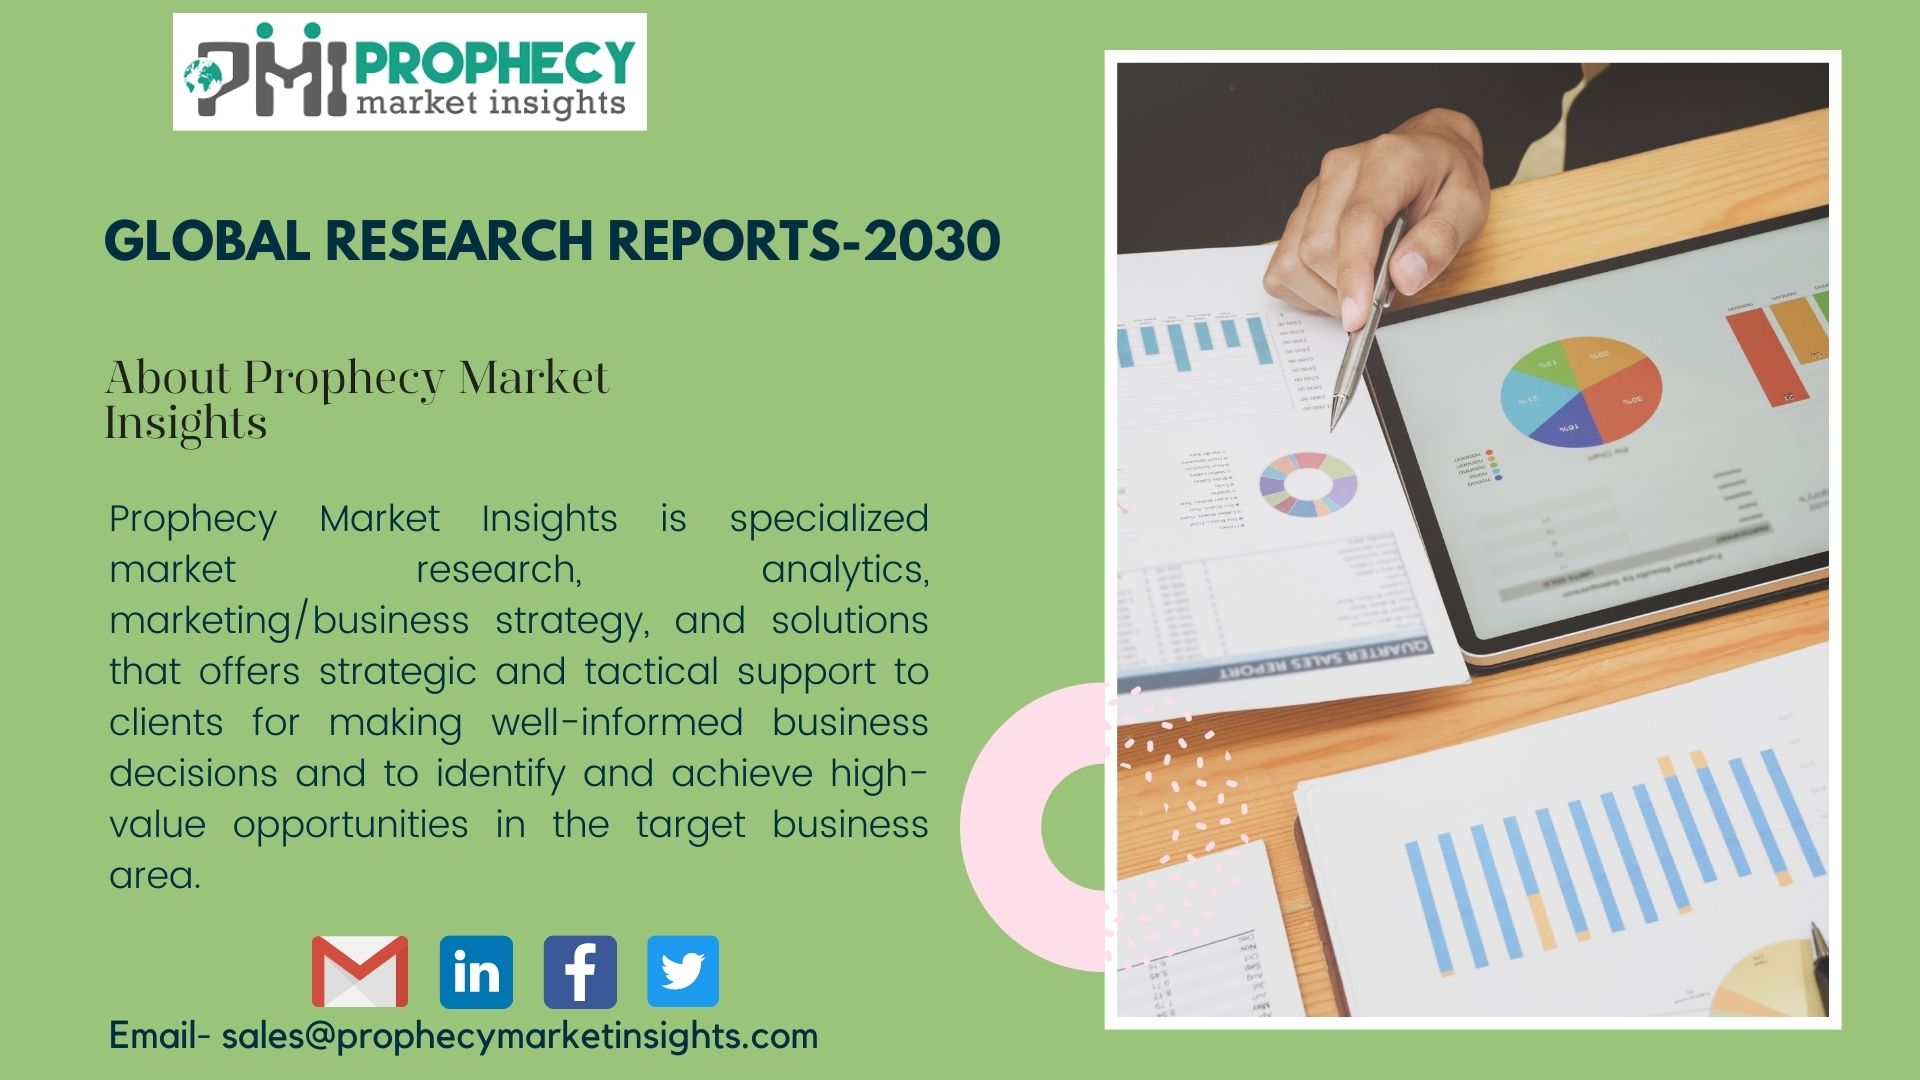 About Prophecy Market Insights (1)-14bf20d9